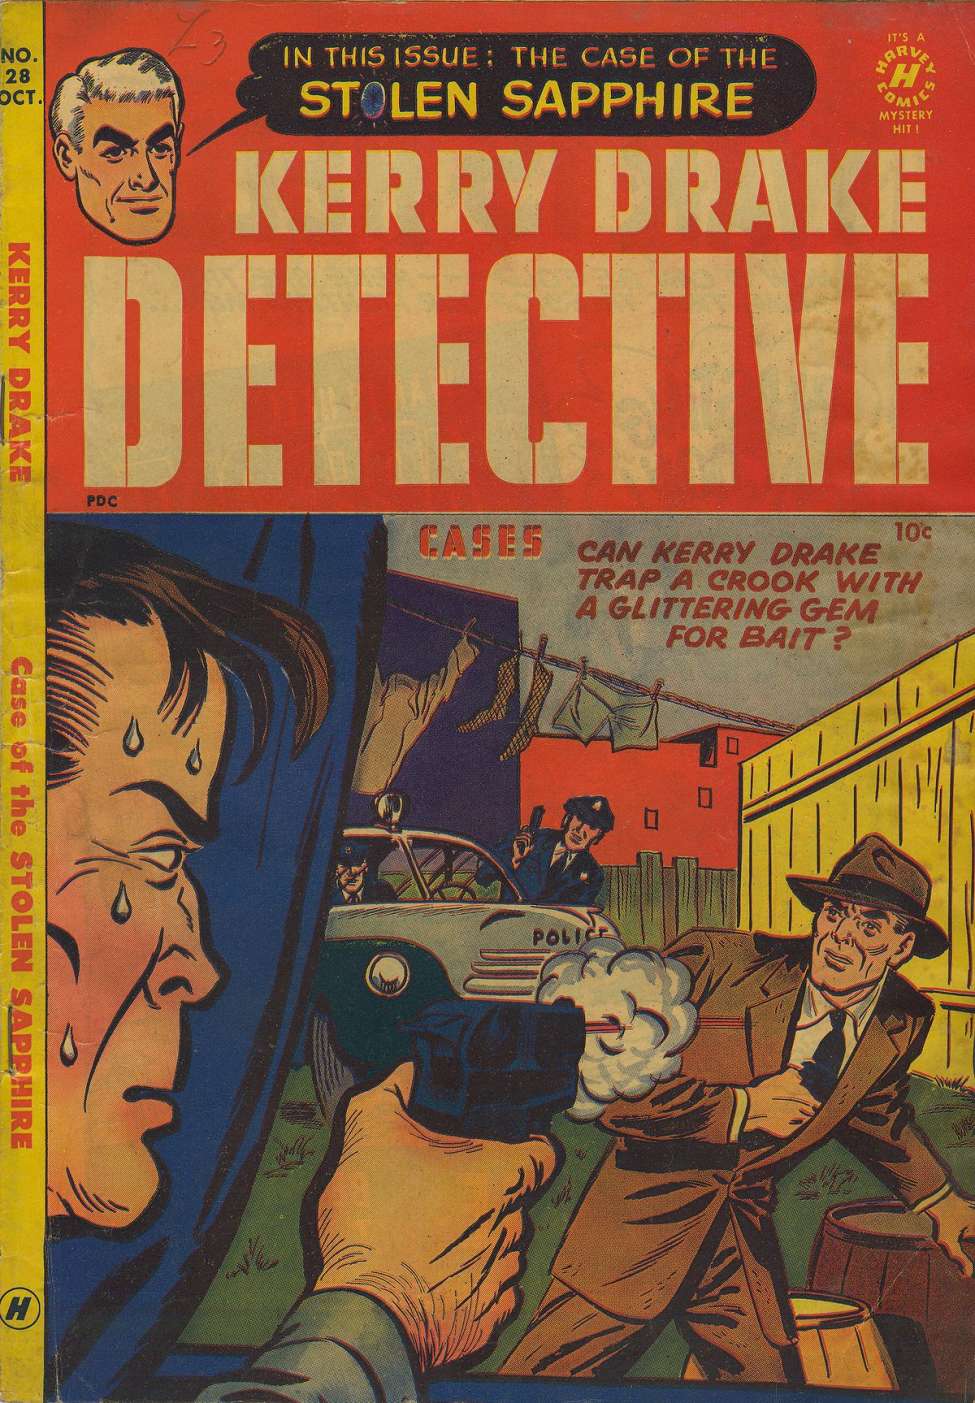 Comic Book Cover For Kerry Drake Detective Cases 28